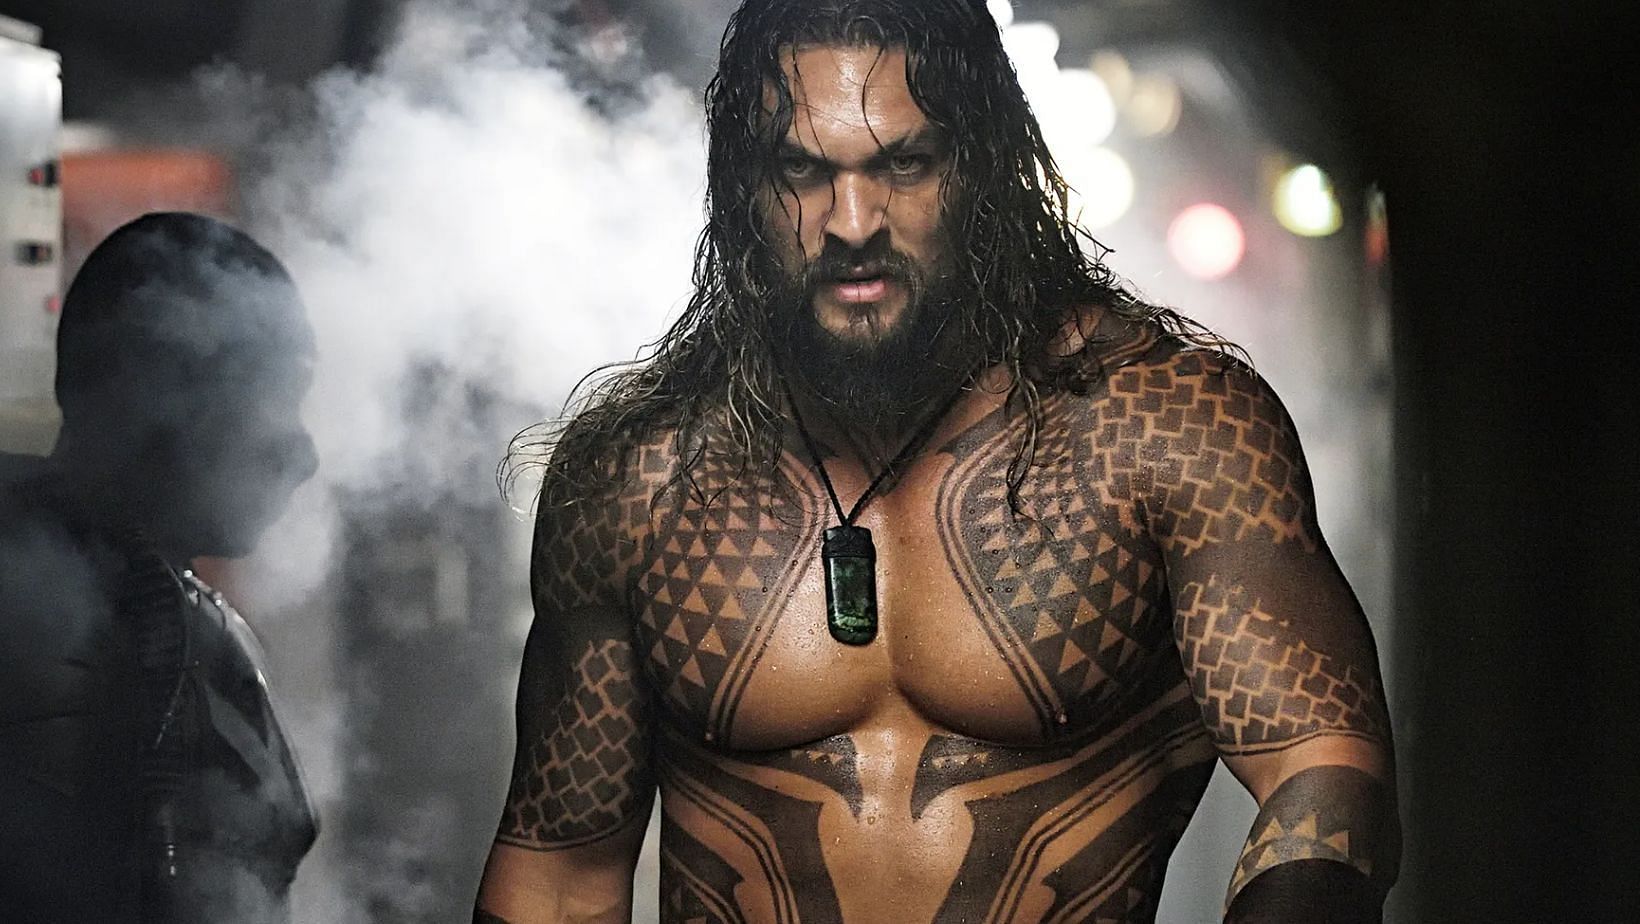 Fans react to Jason Momoa as Lobo in the James Gunn-led DCEU, some expressing excitement while others disappointment over his departure from the role of Aquaman (Image via Warner Bros)